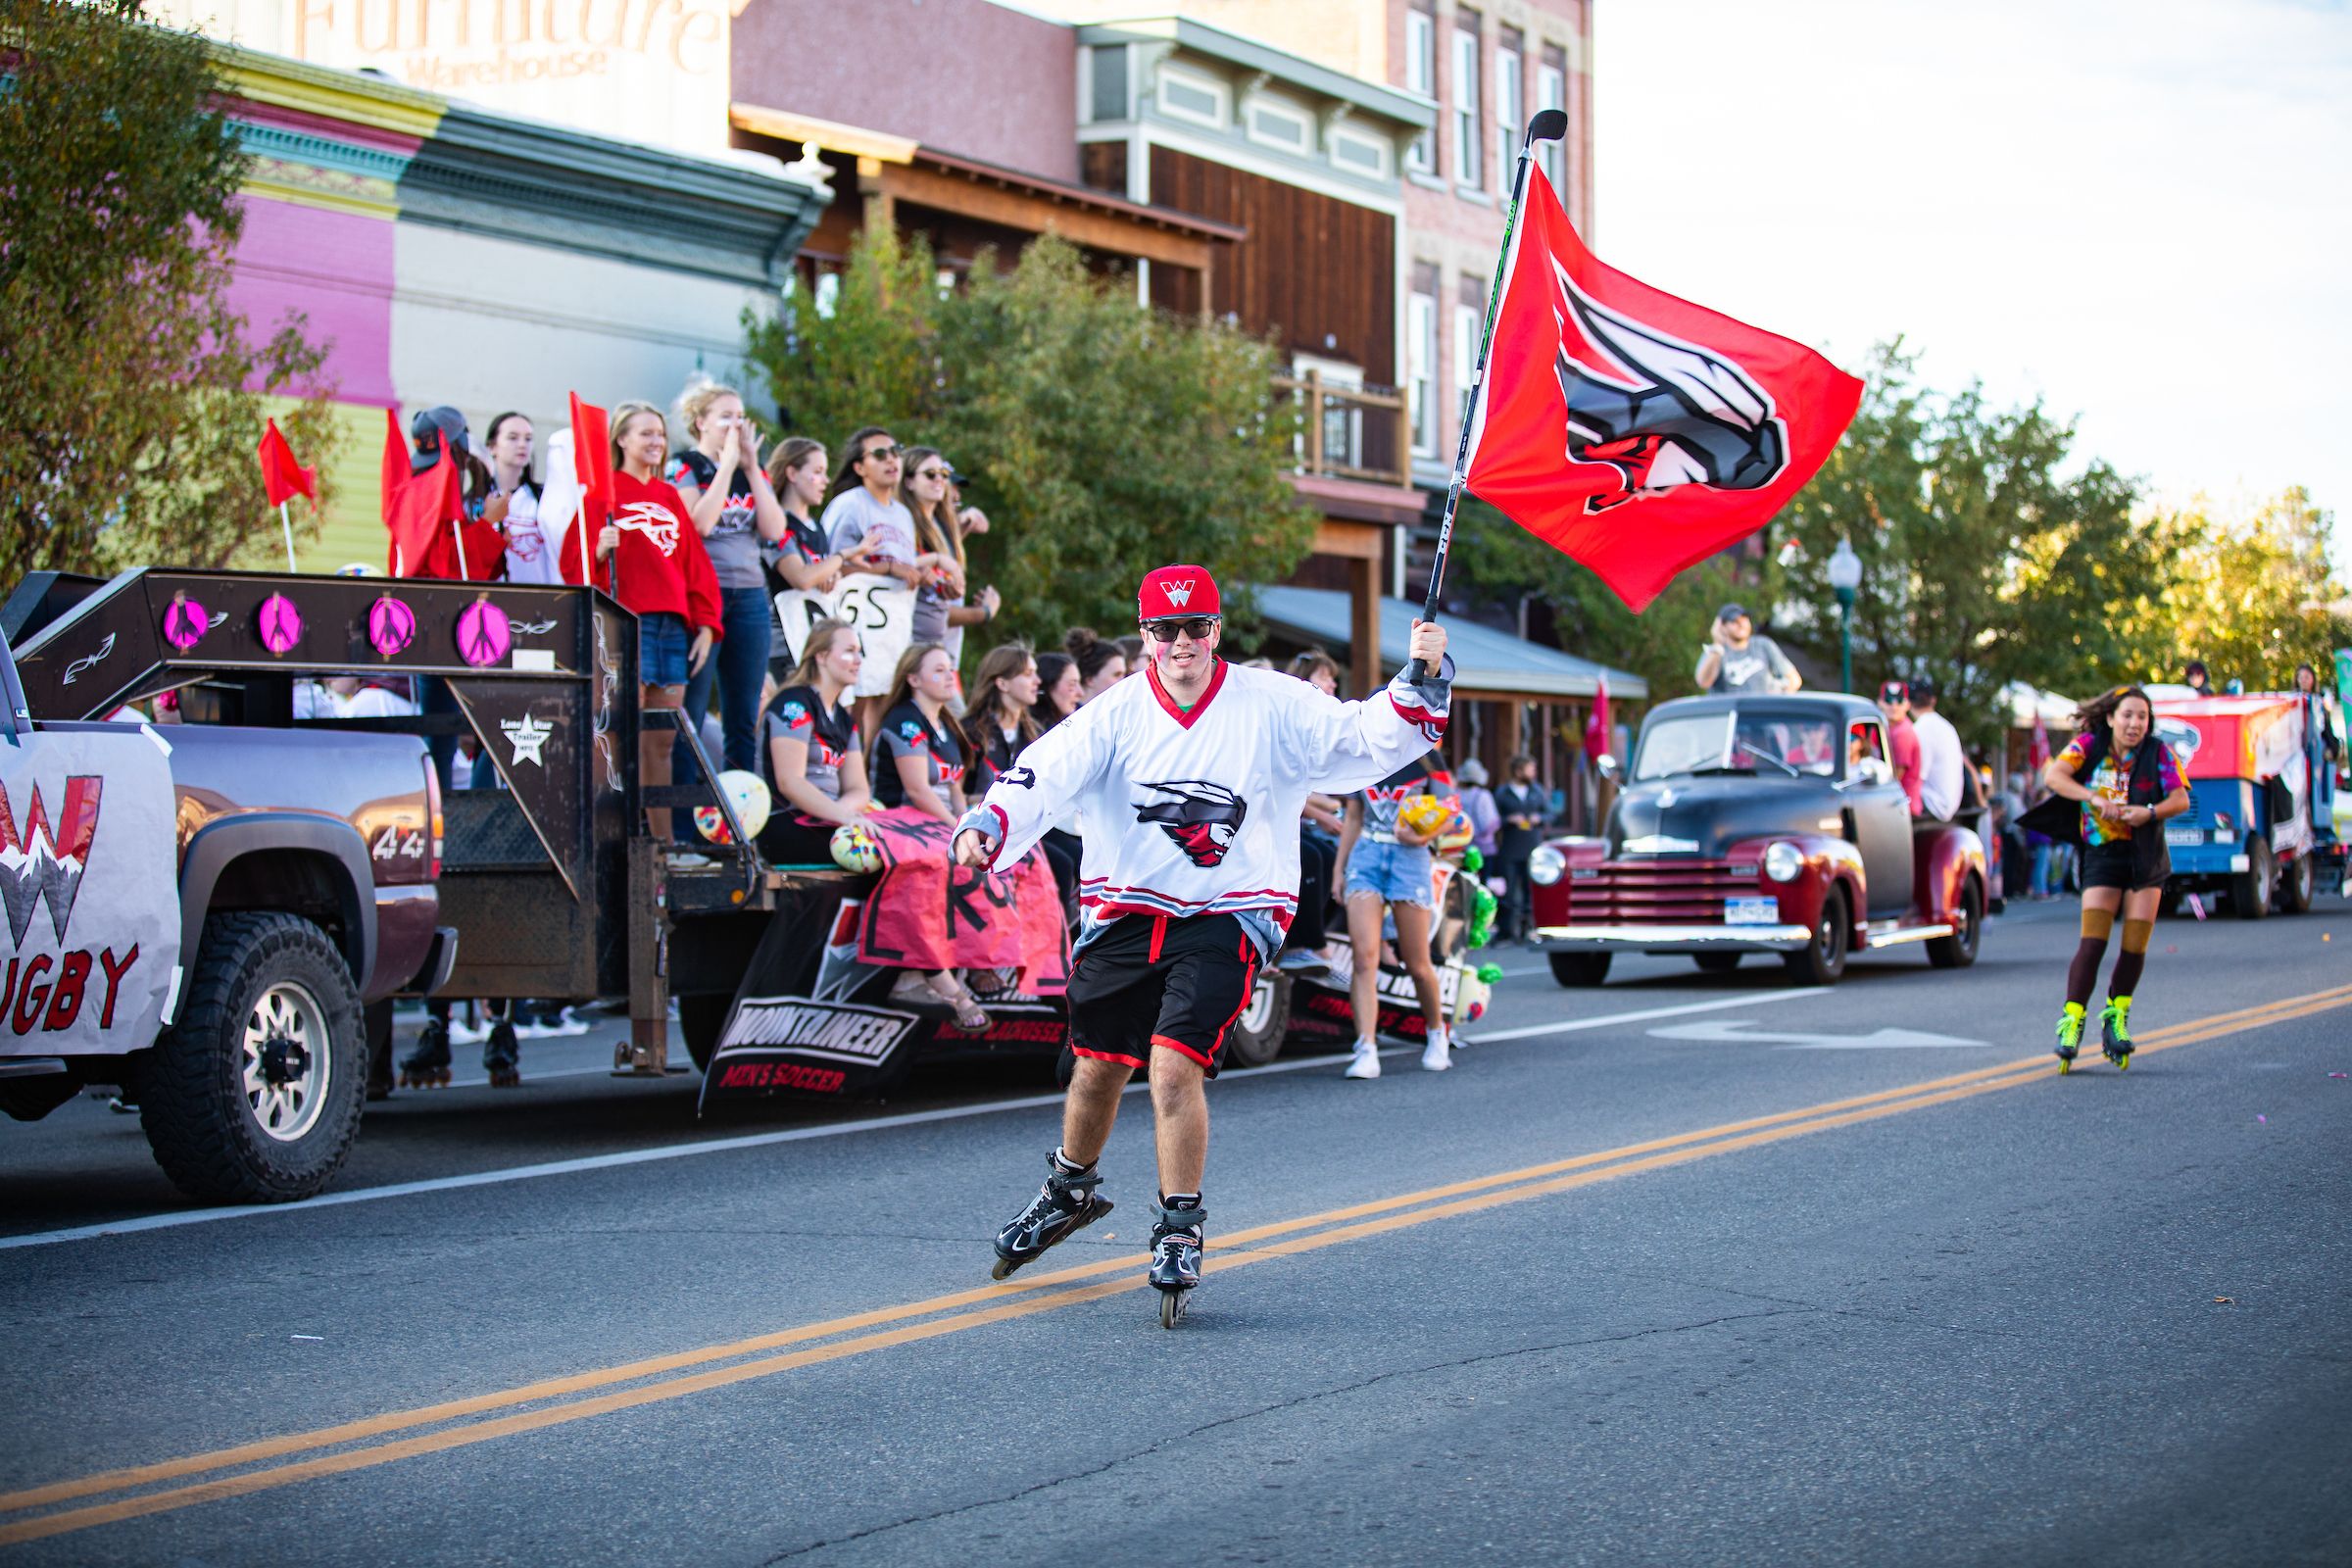 A student roller blades while holding a flag during the Western Colorado University homecoming parade in Gunnison, Colorado. 